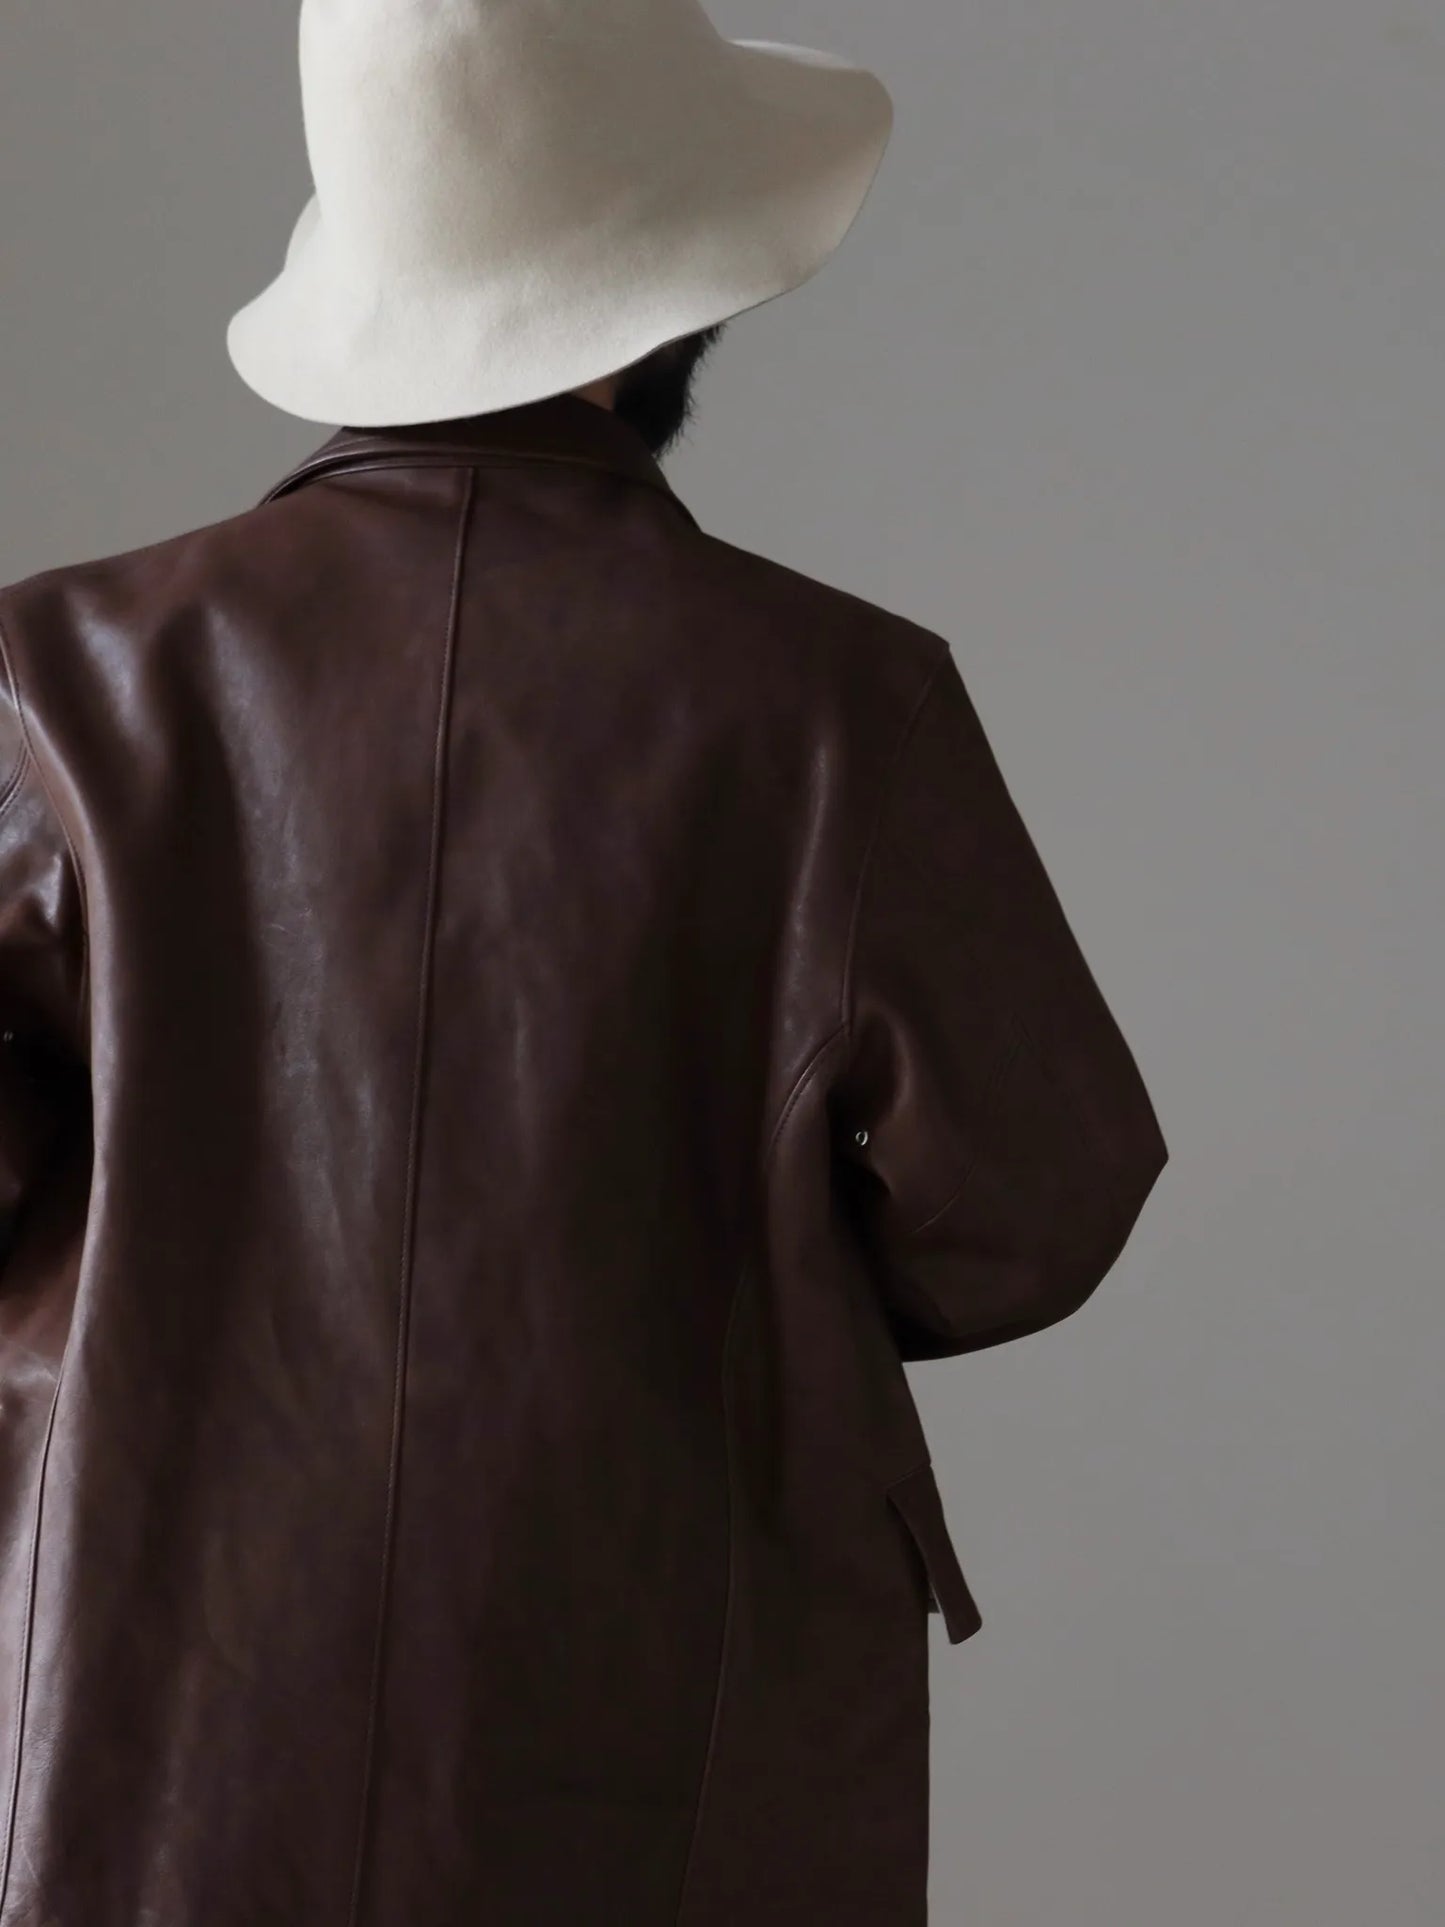 t-t-sack-leather-coat-mud-dyed-brown-6